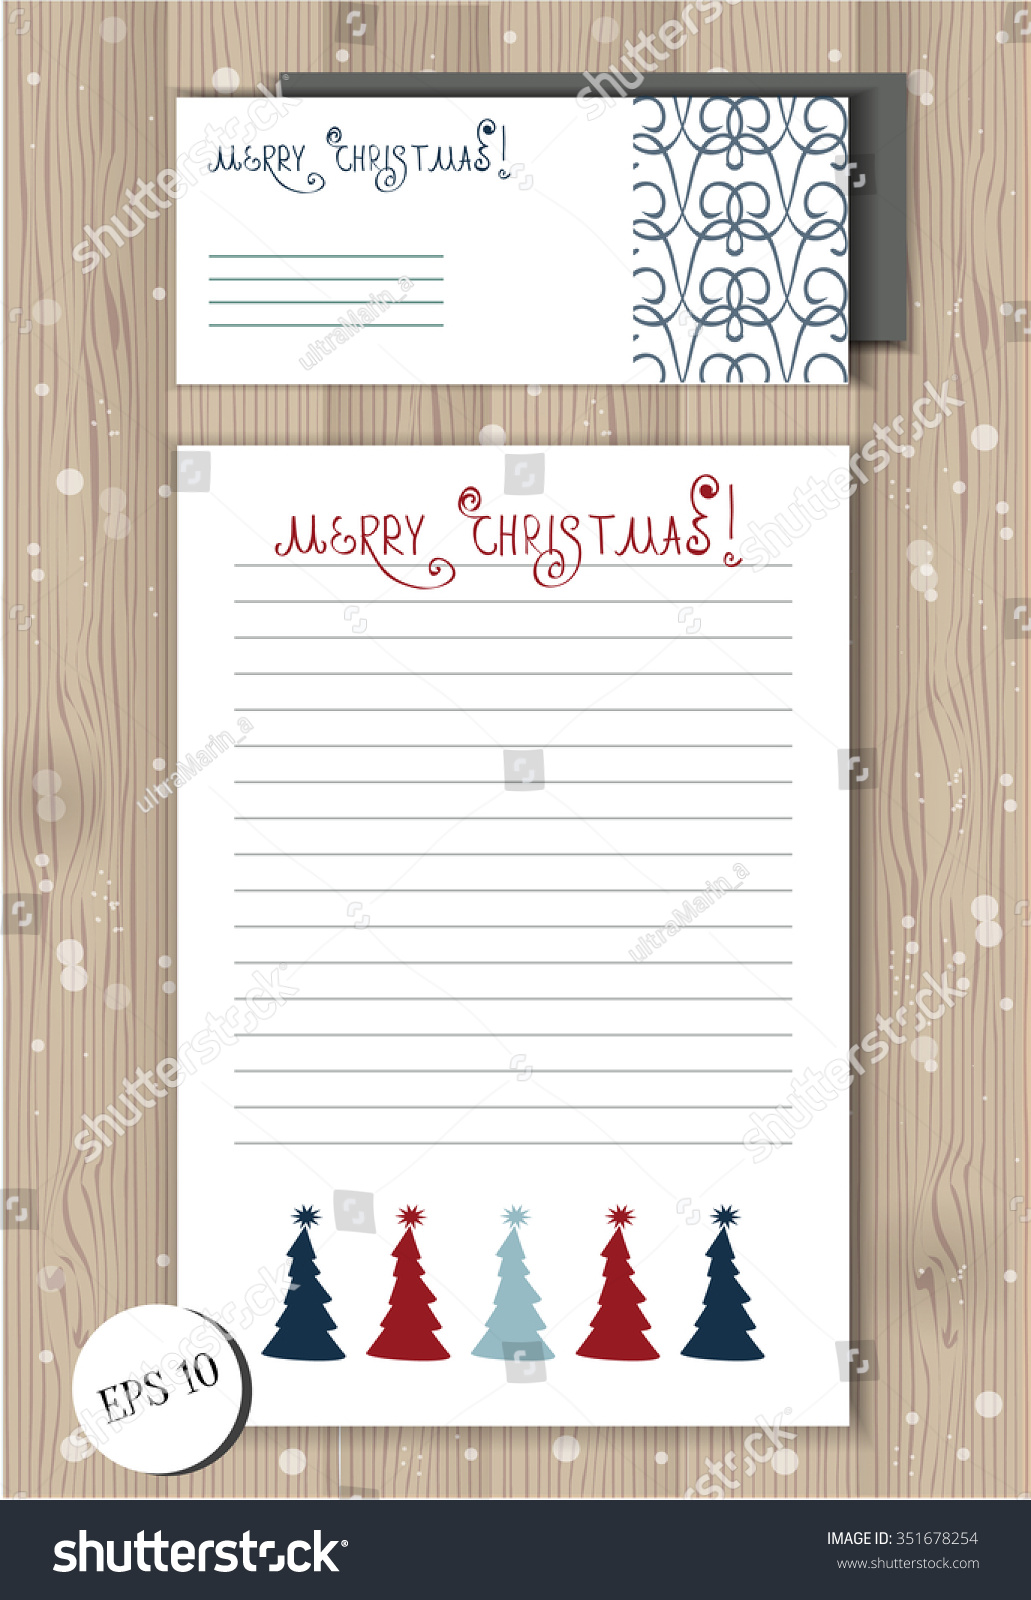 Christmas Note Template from image.shutterstock.com